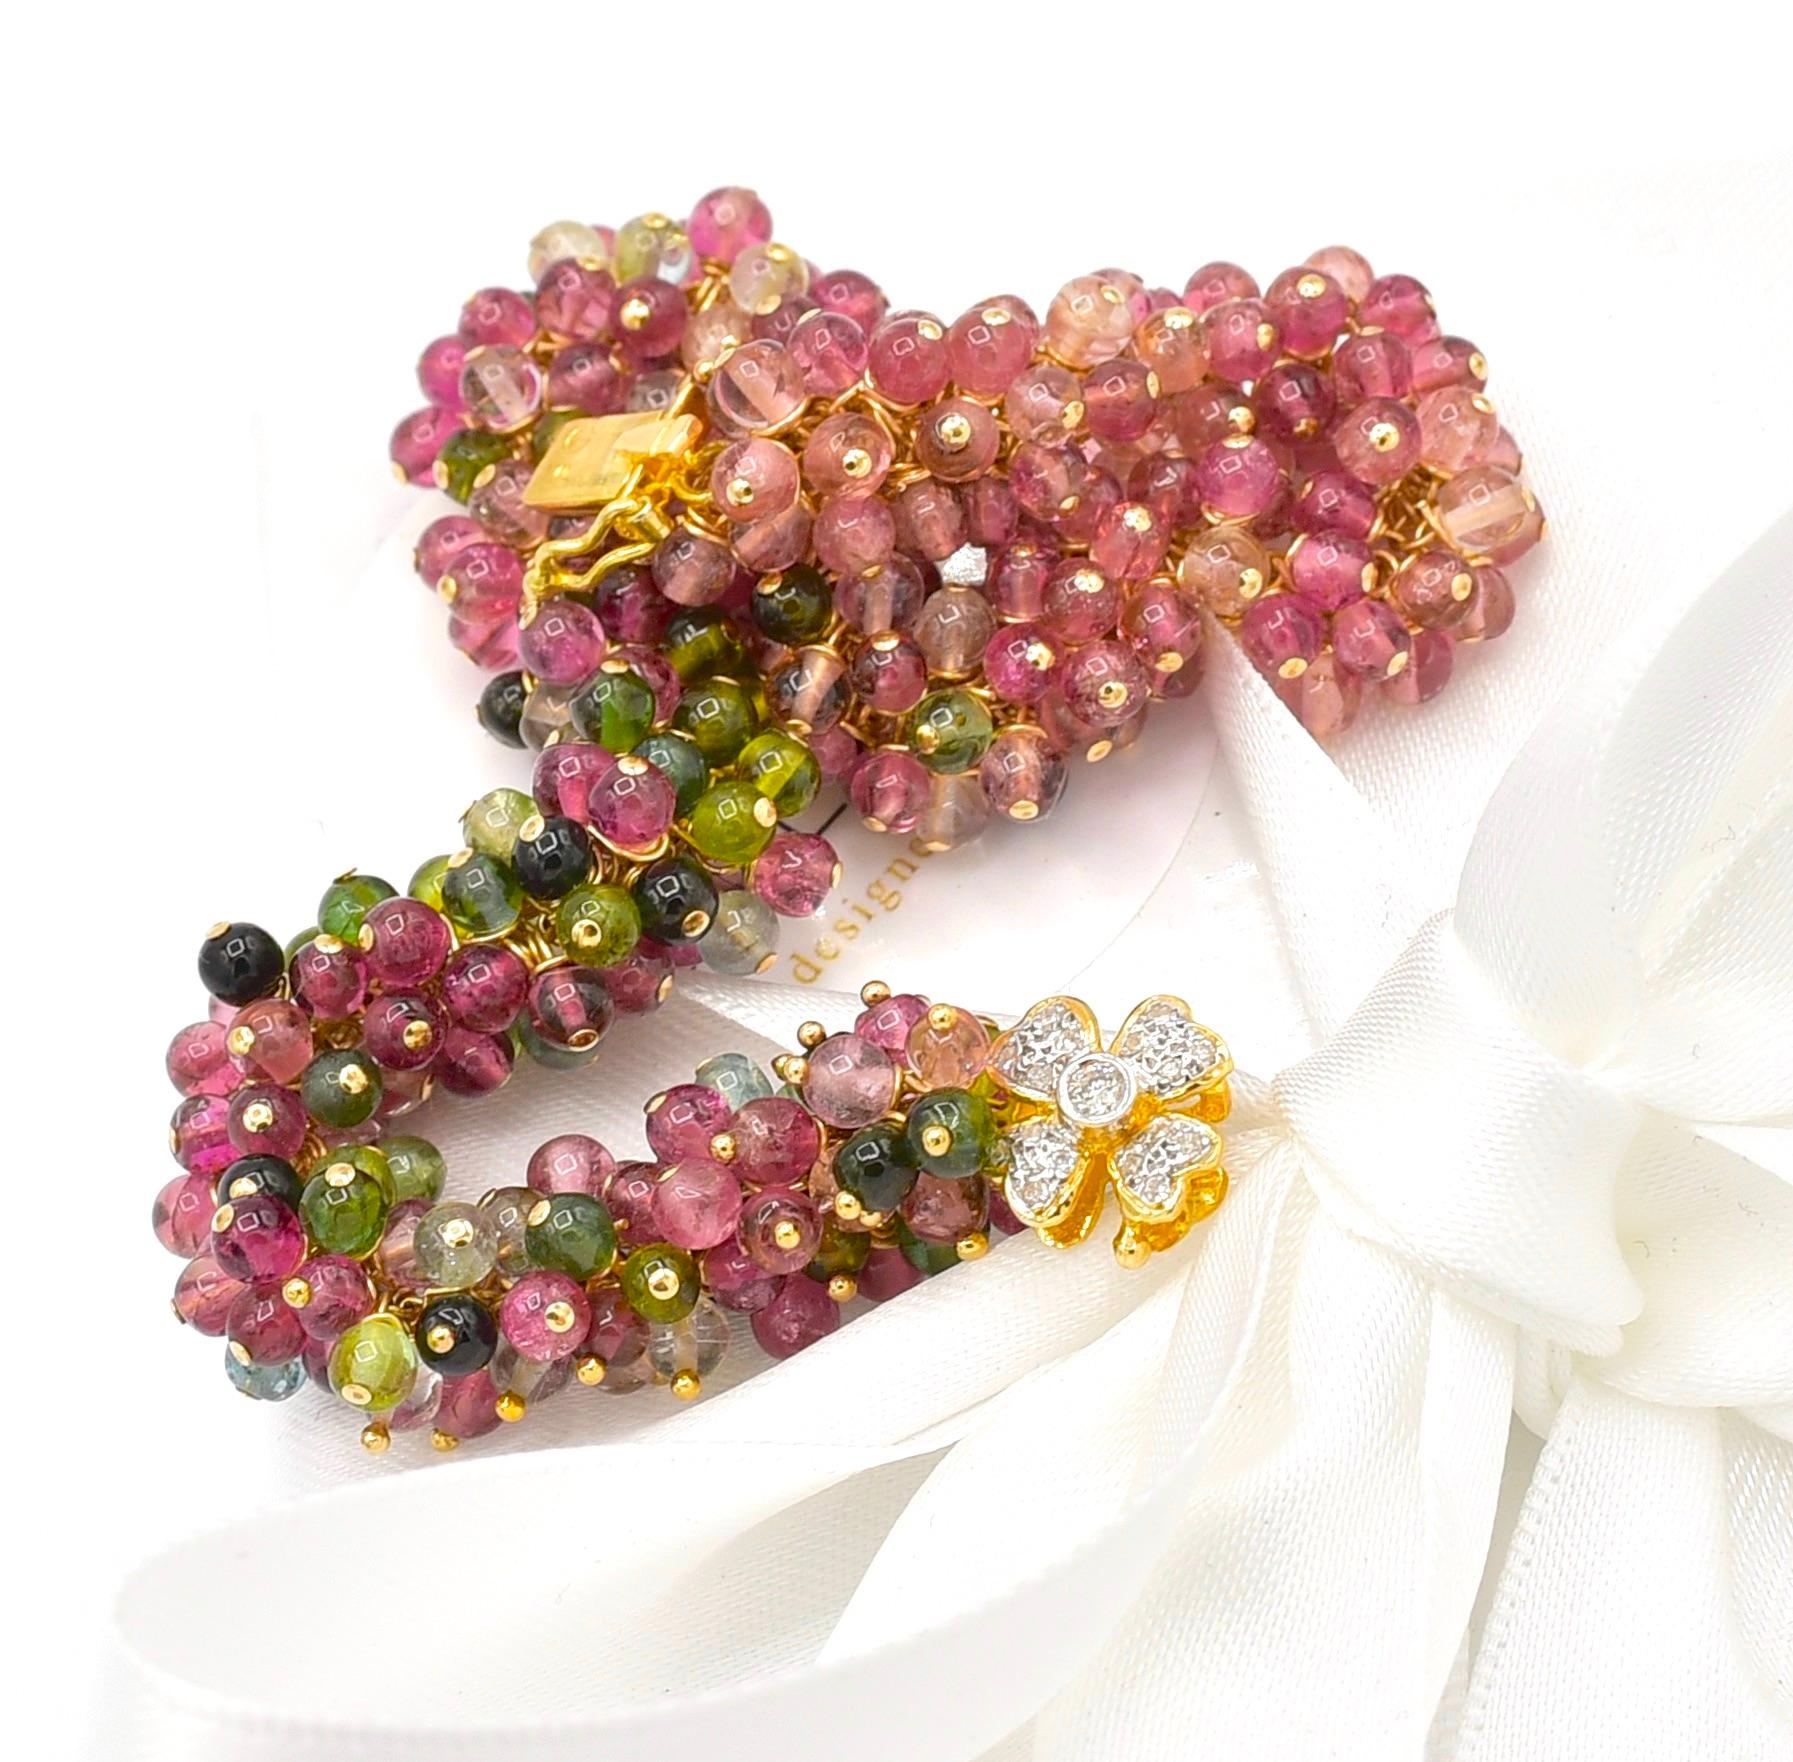 Tourmaline Beads with 14K Solid Yellow Gold Diamond Floral Clasp Bracelet 5